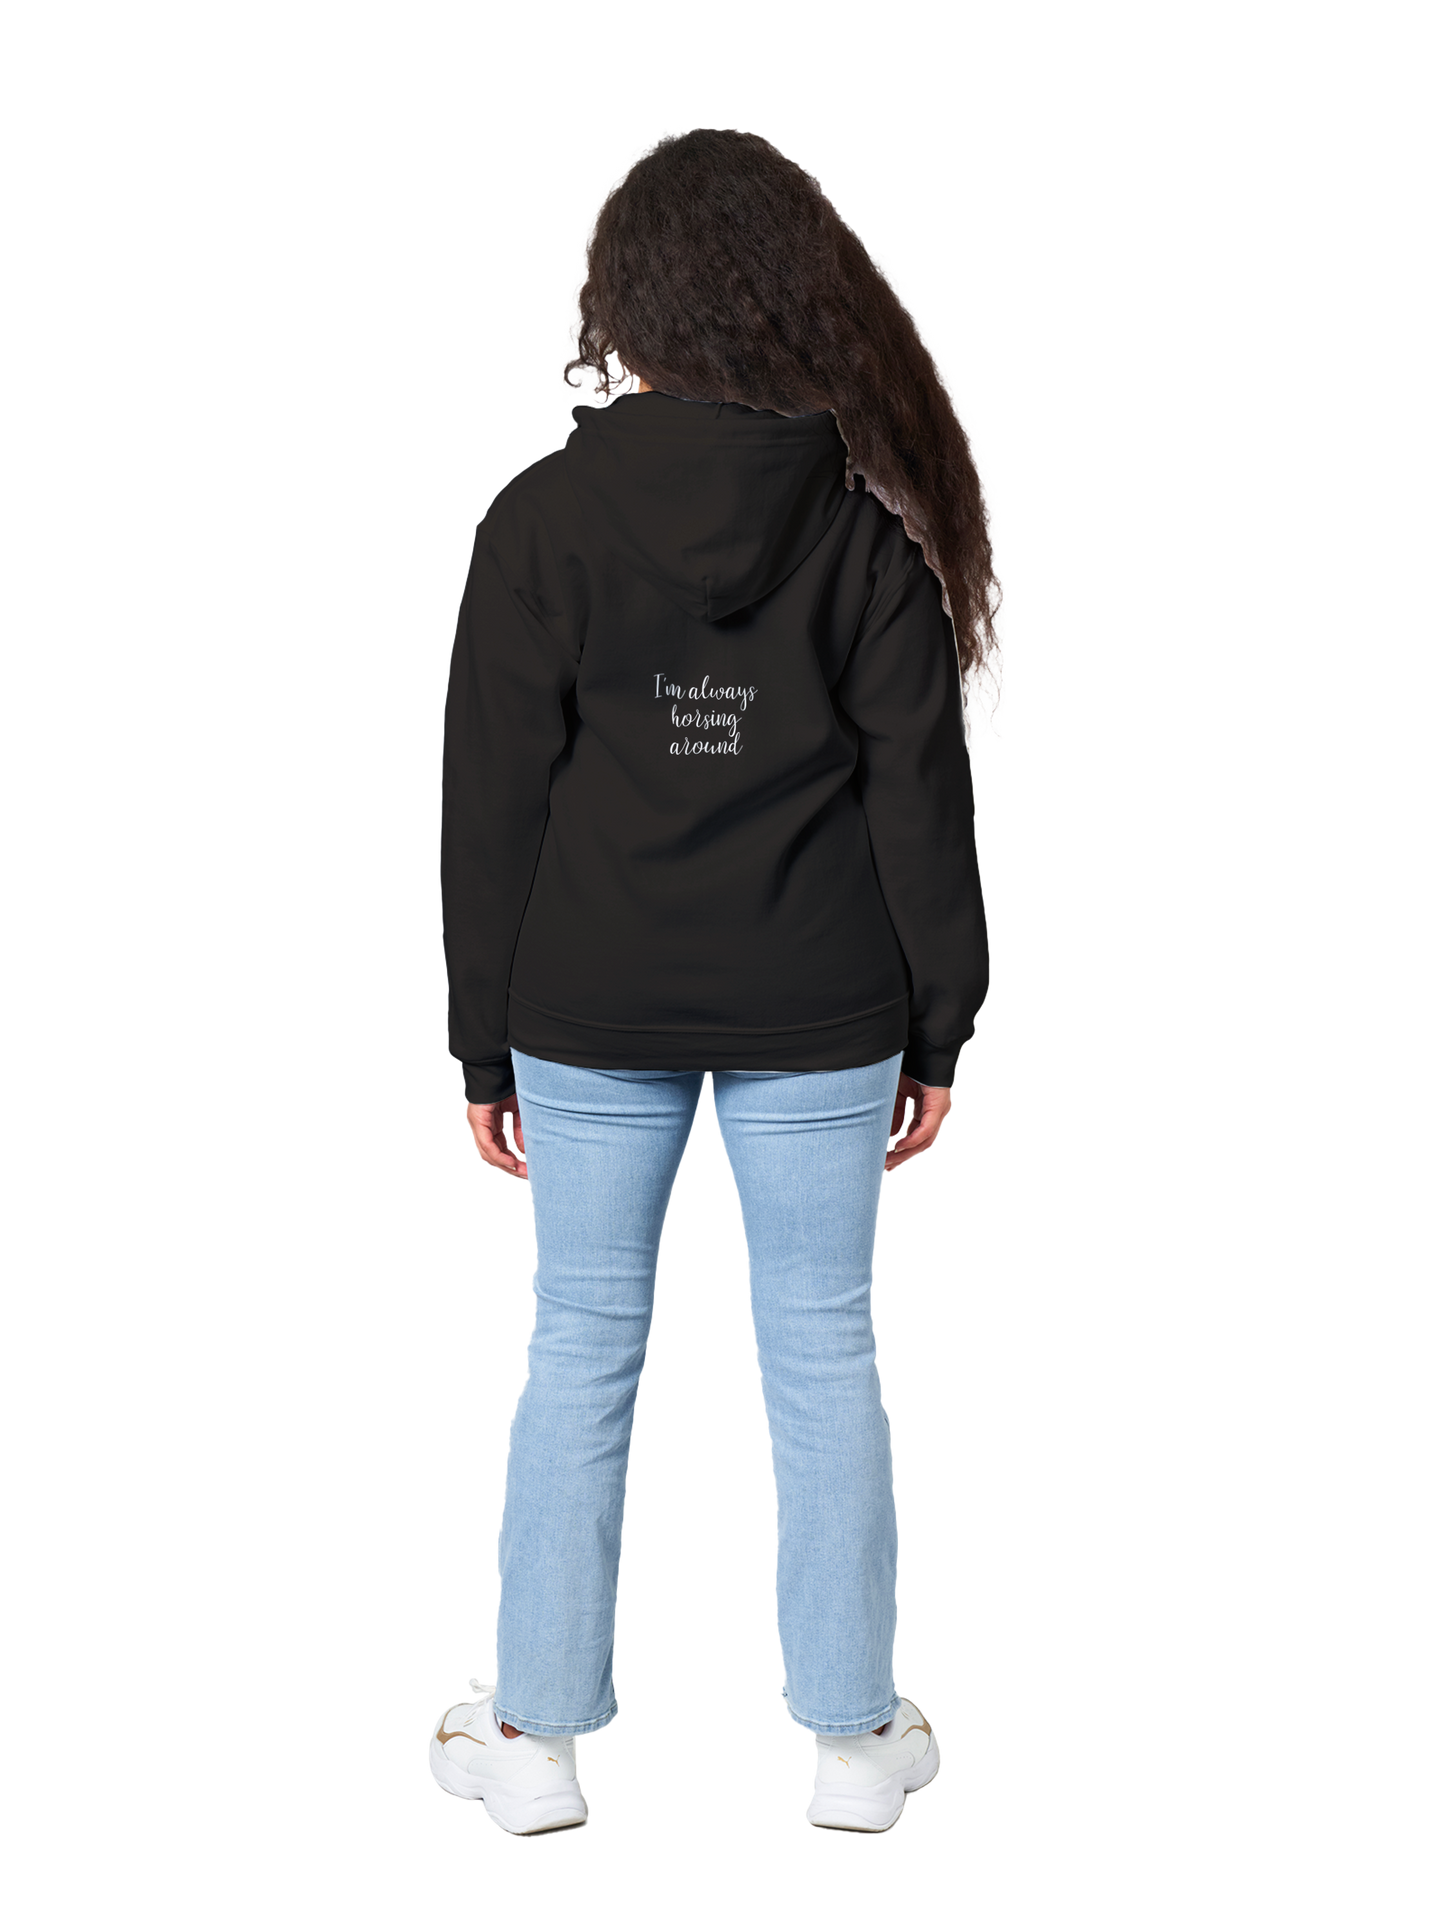 Hand Drawn Horse || Unisex Zip Hoodie - Design: ''FREEDOM"; Static Design; Personalizable Back Text